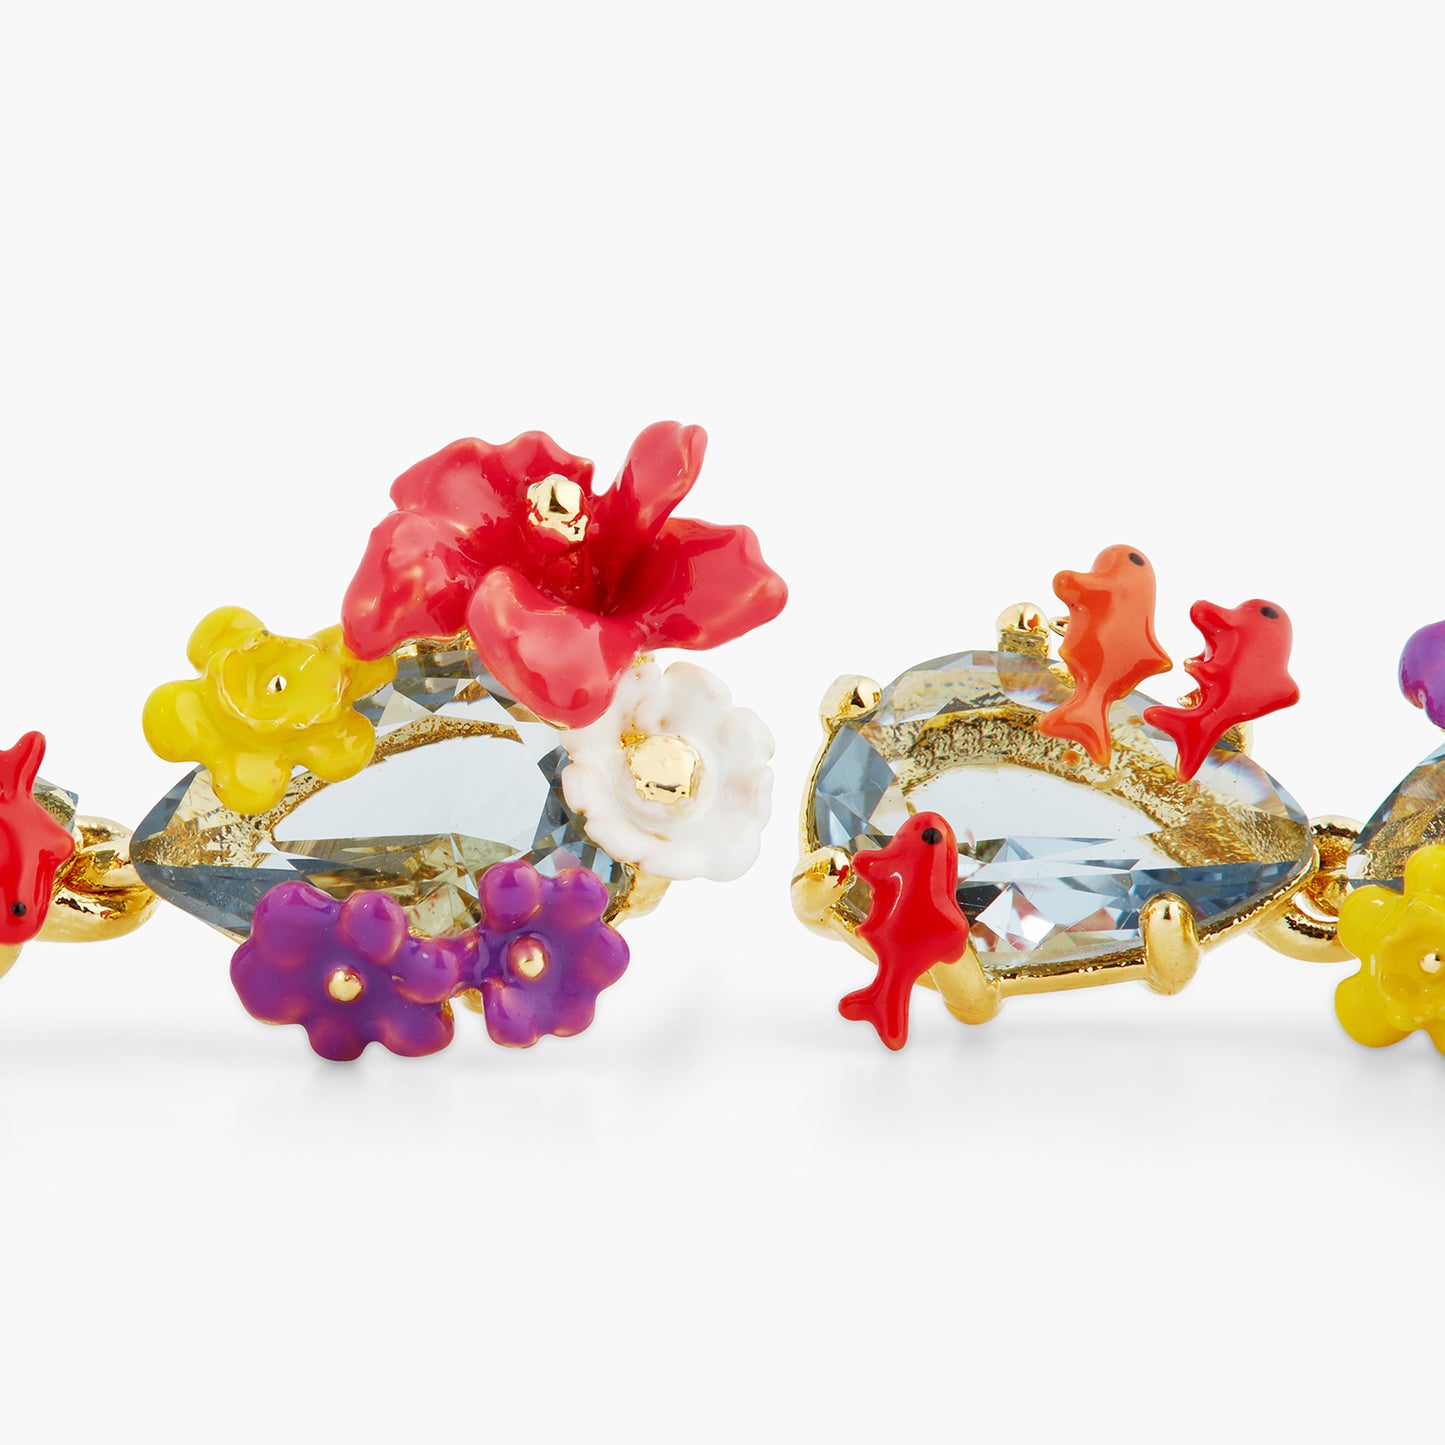 Double stone, flowers and koi fish earrings | ASOS1071